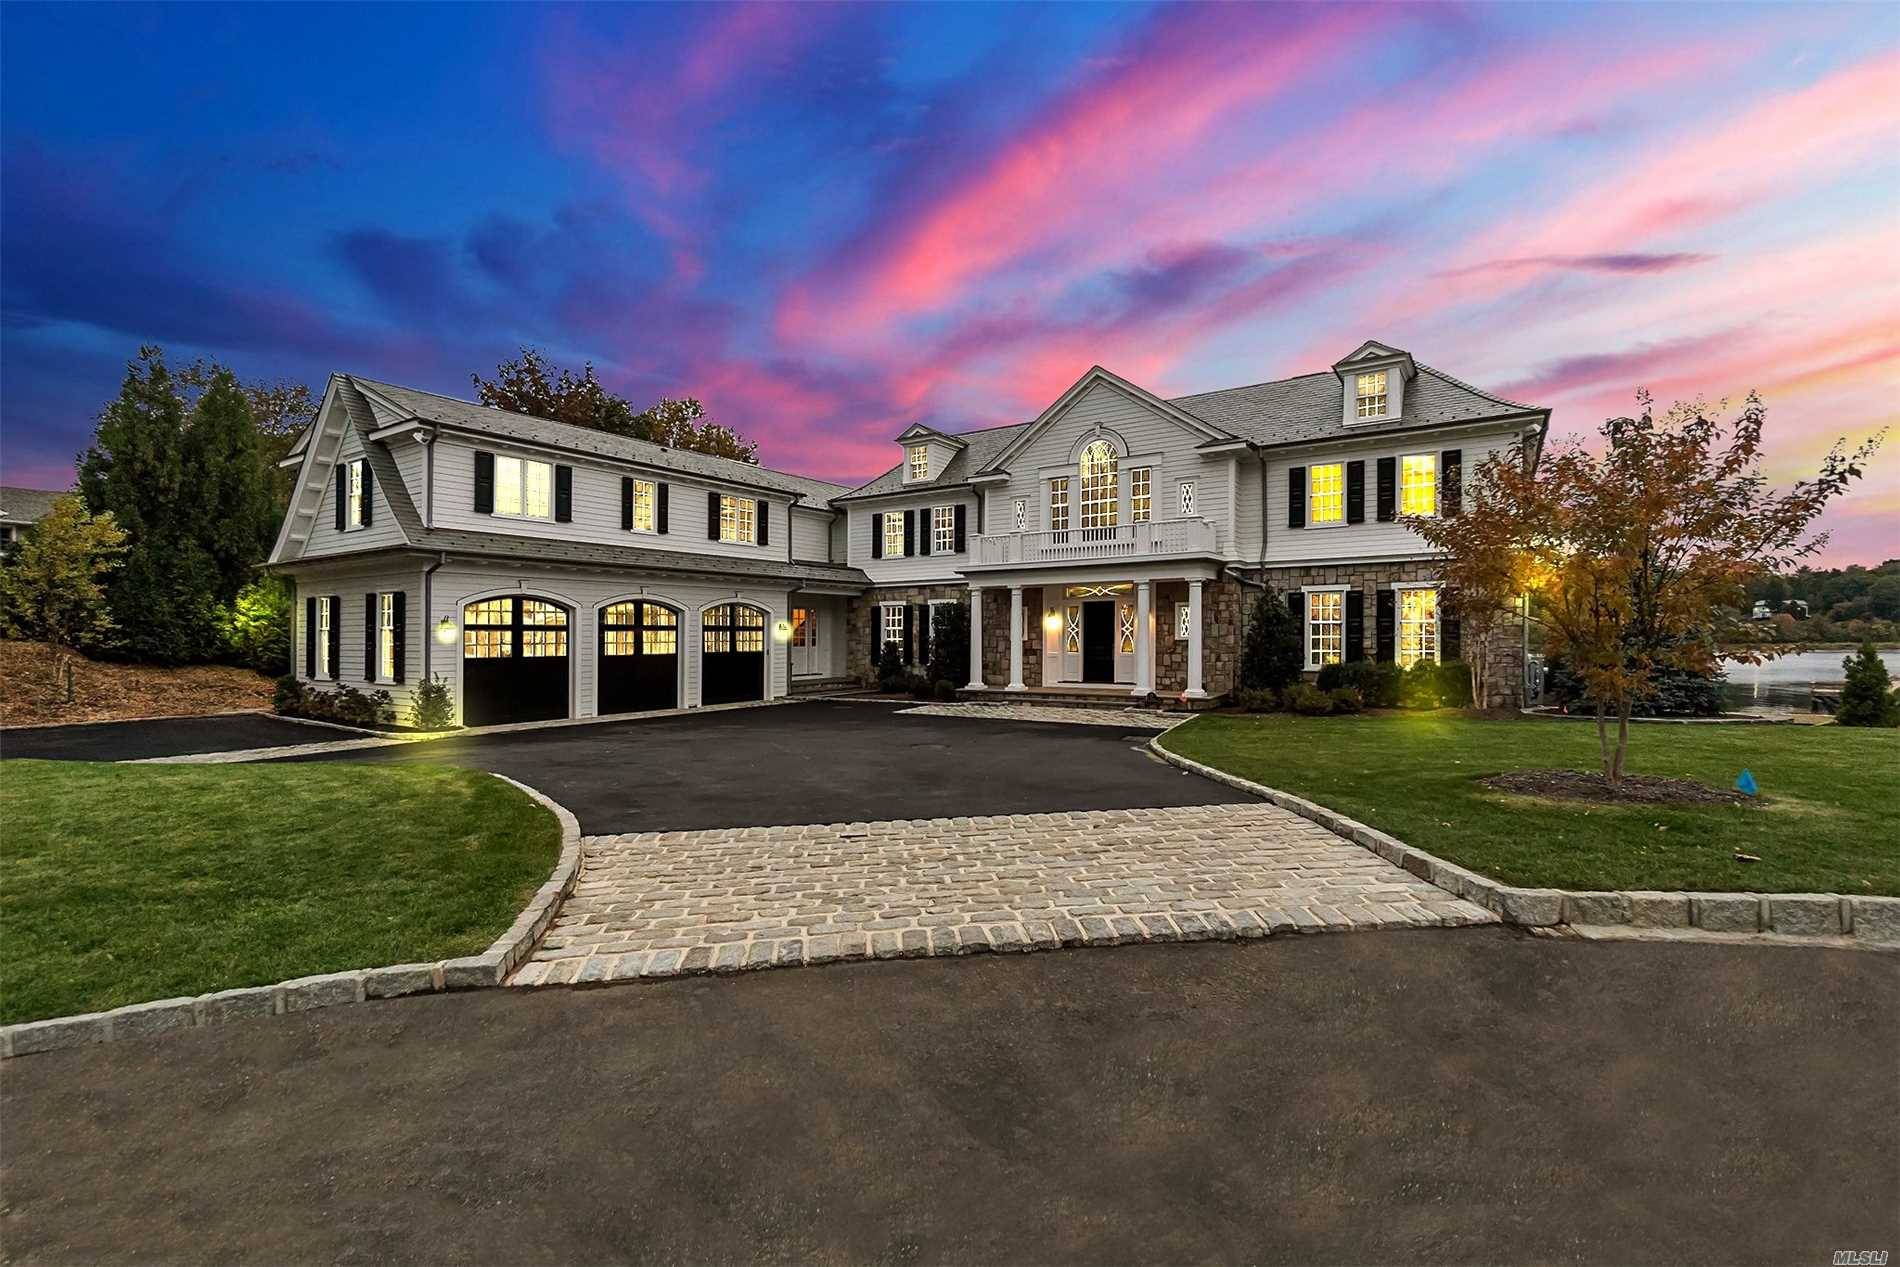 Newly Designed And Built This Connecticut Stone And Ship Lap Center Hall Colonial, Situated On A Private Road In Plandome Over Looks Manhasset Bay With Year Round Sunsets.